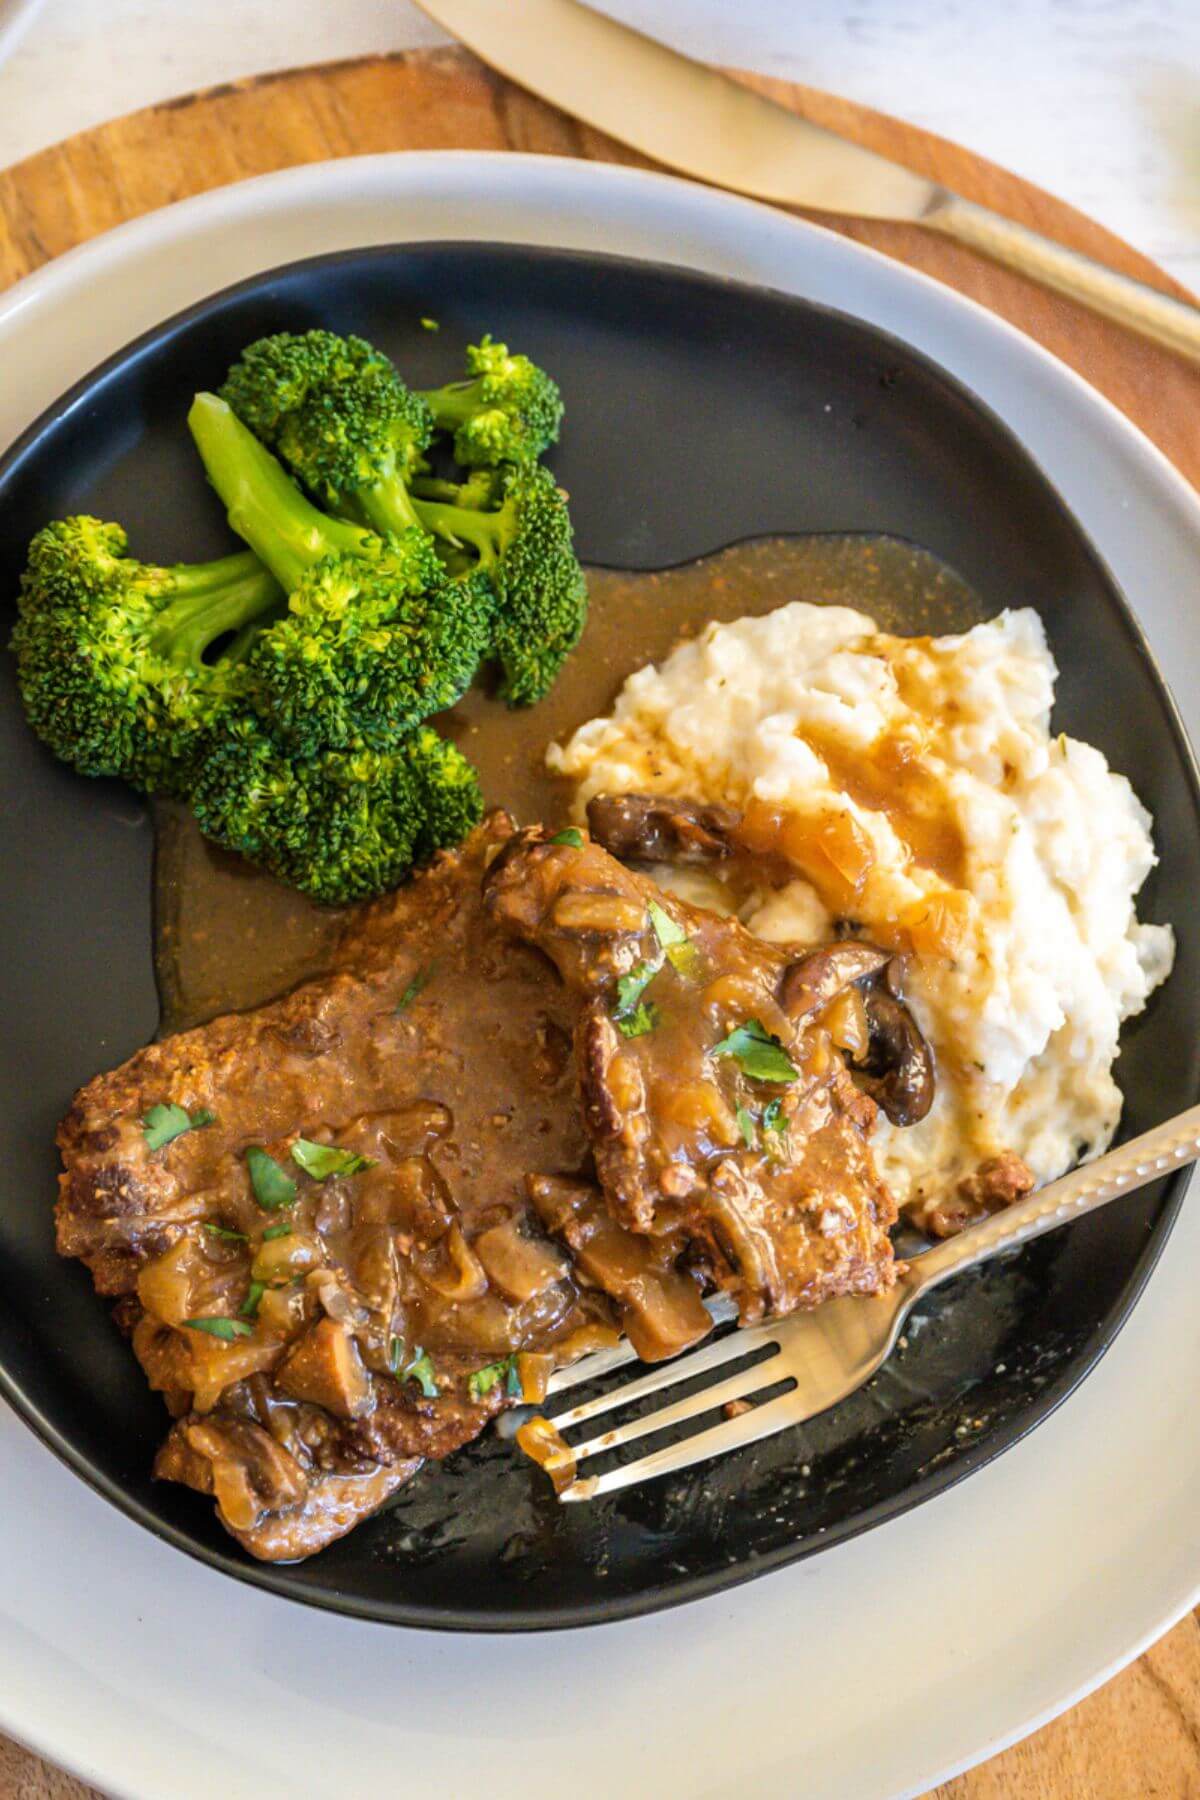 A fork lies next to cube steak, mashed potatoes, gravy and broccoli on plate.